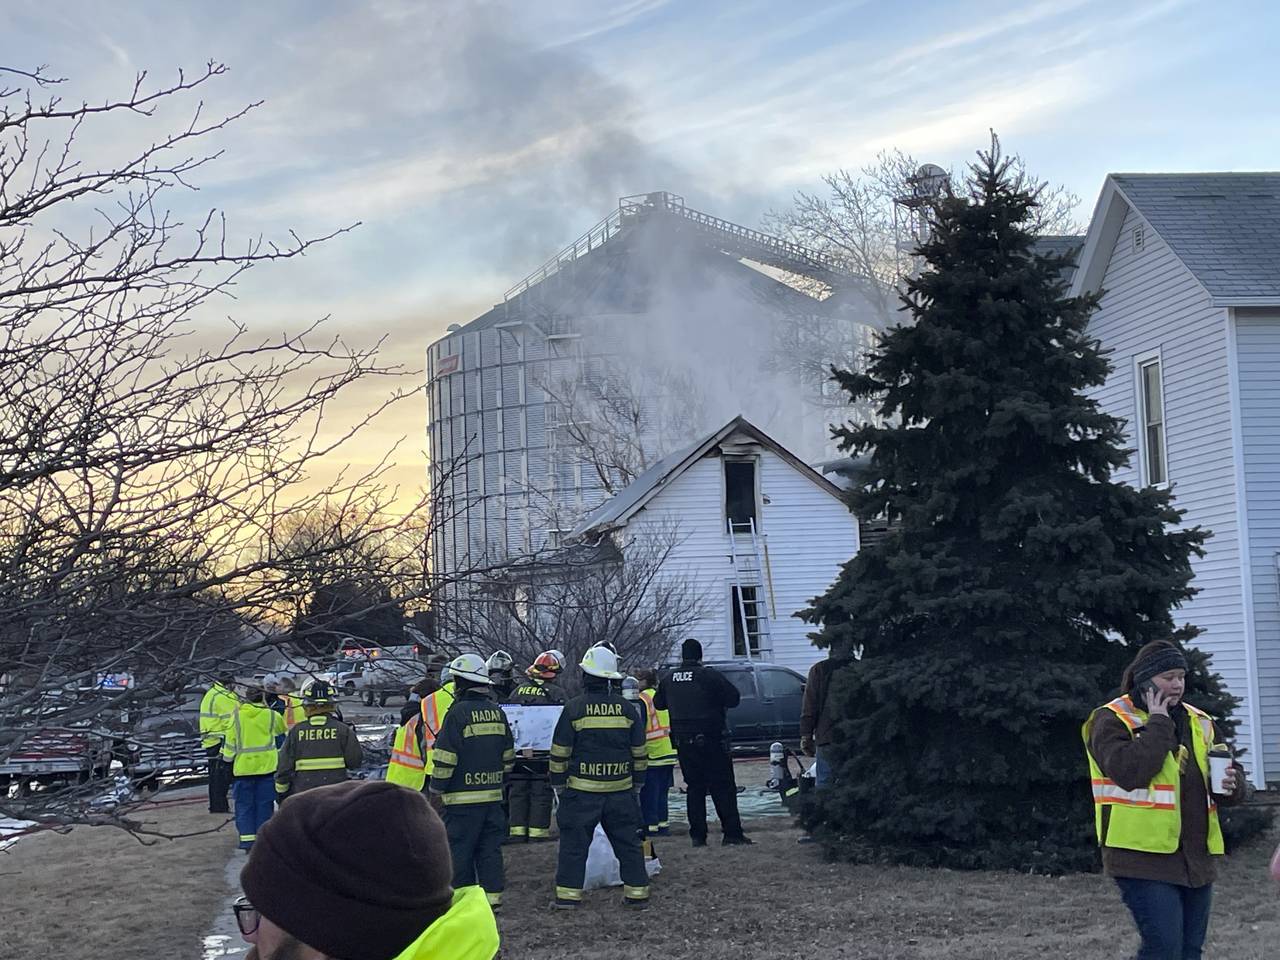 Multiple area fire departments assist Pierce Fire & Rescue at the scene of a house fire in Pierce, ...